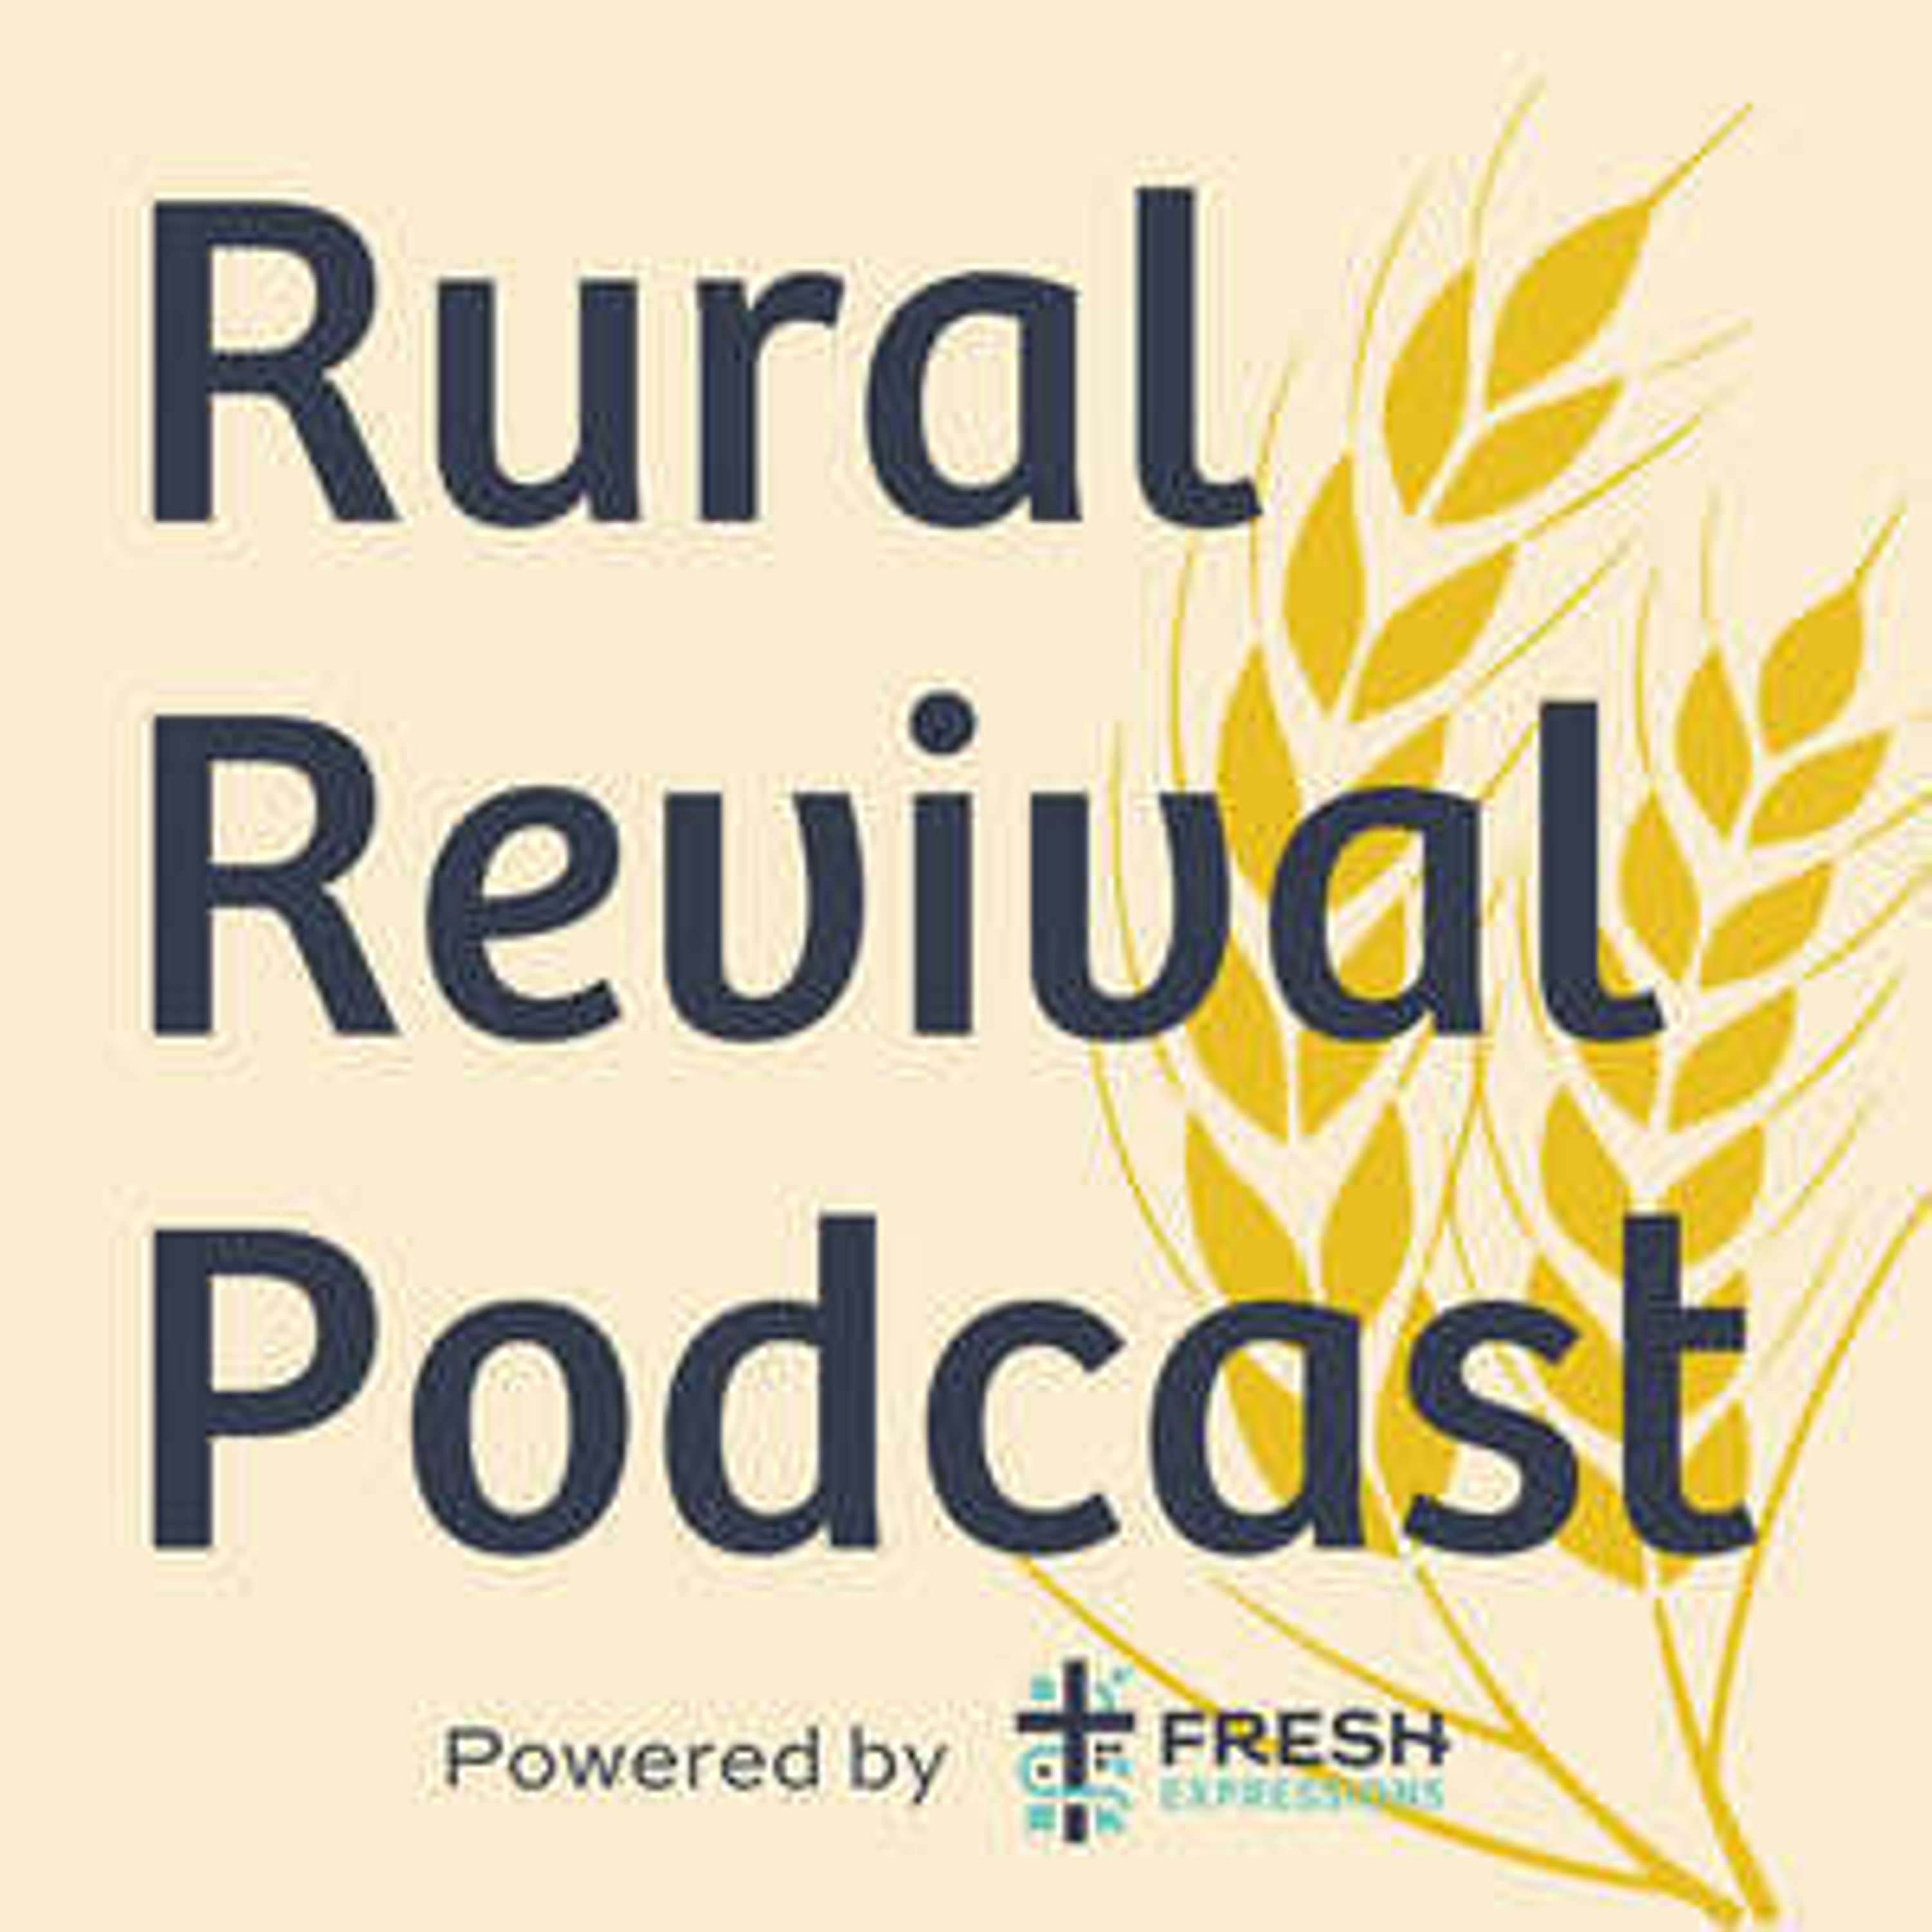 PREVIEW: Hope for Rural North America and the Rural Church with Allen Stanton | Rural Revival Podcast